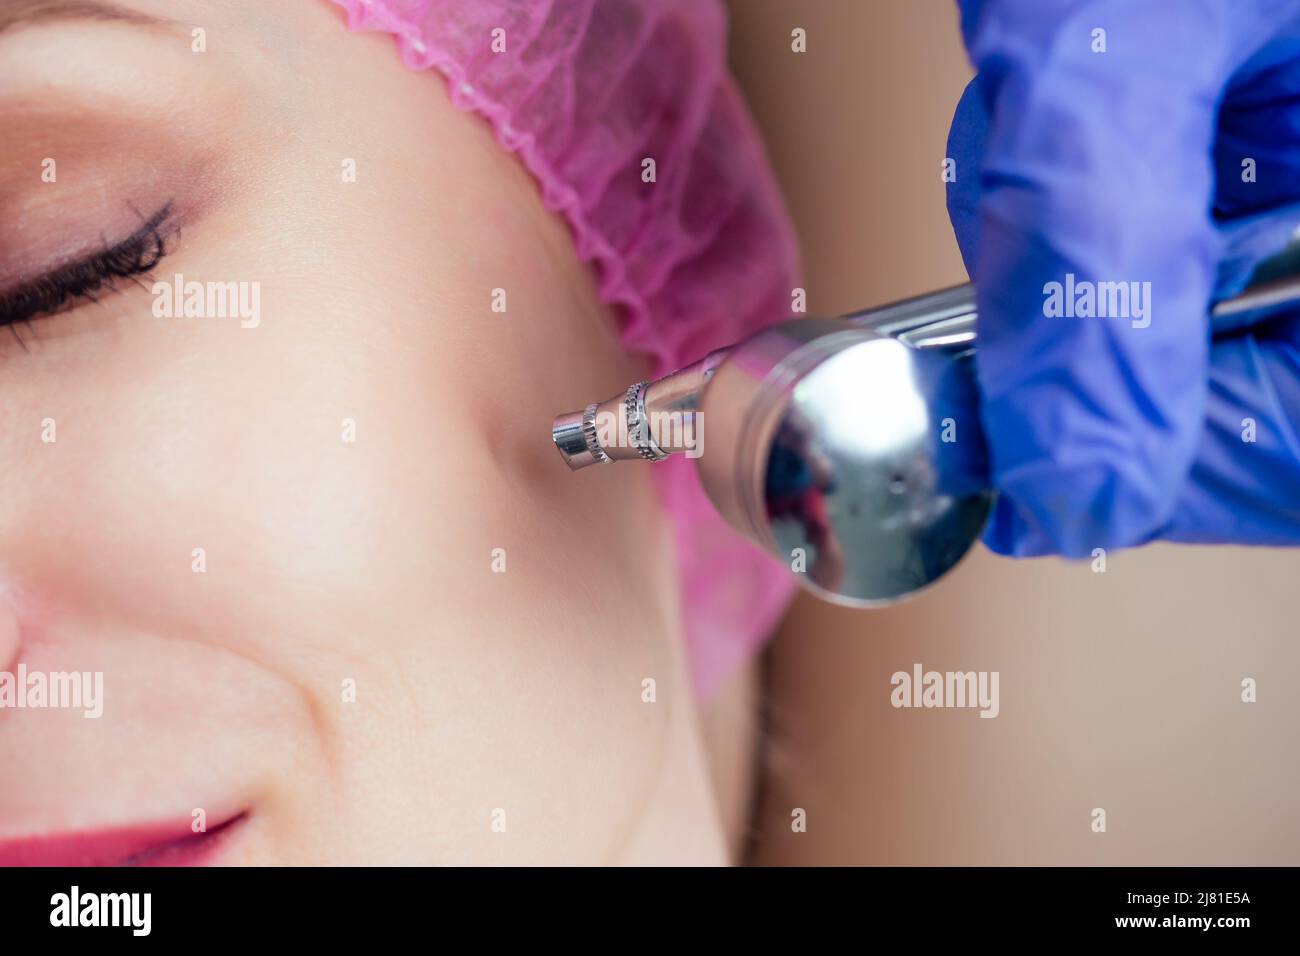 woman getting facial massage with oxy air spray .oxygen therapy in spa salon.close up cheek face of patient Stock Photo